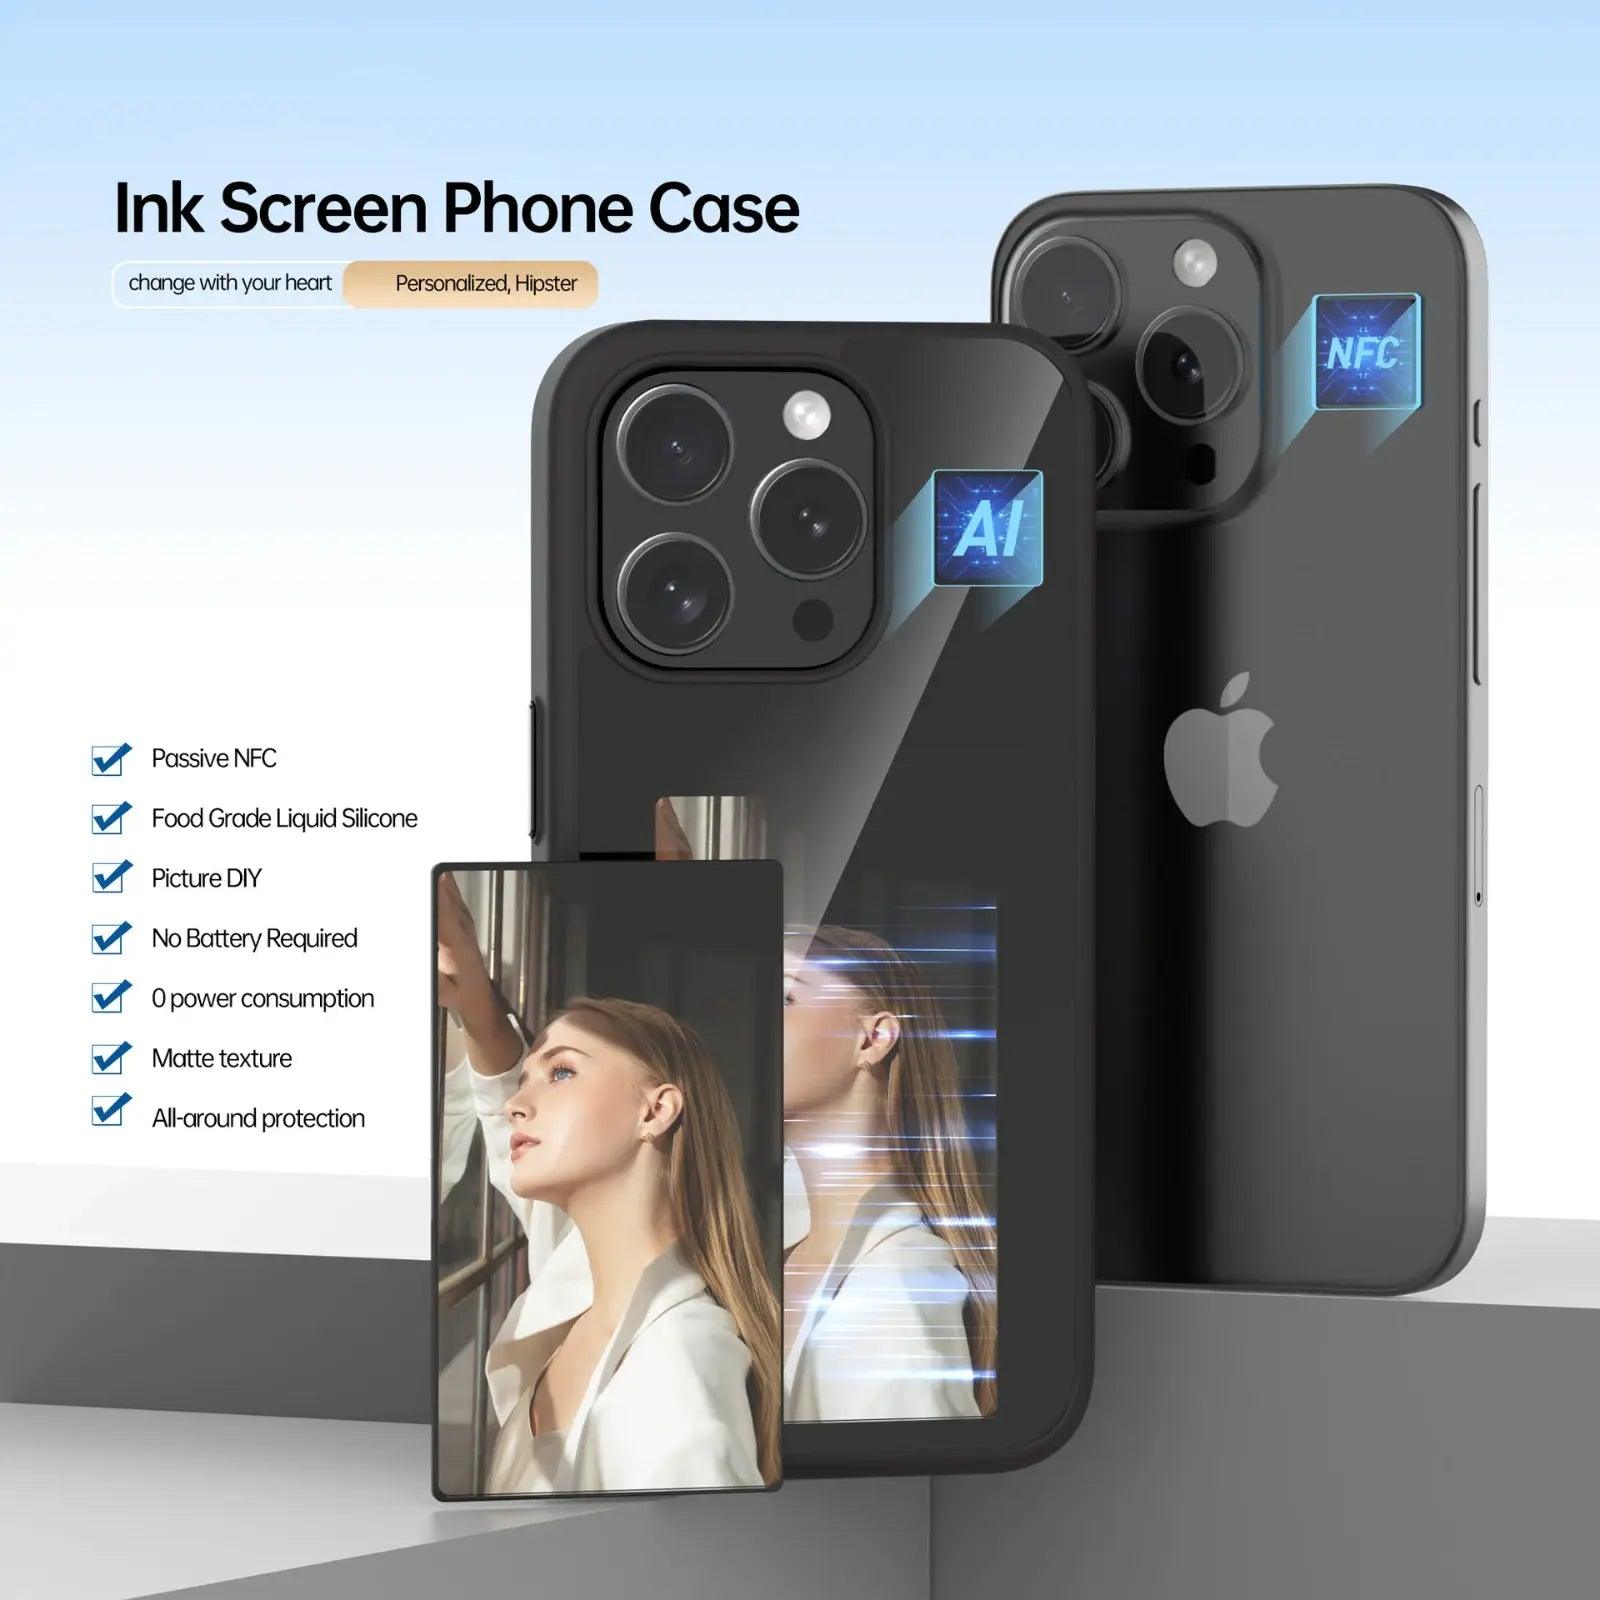 Screen Projection Phone Case - ACO Marketplace